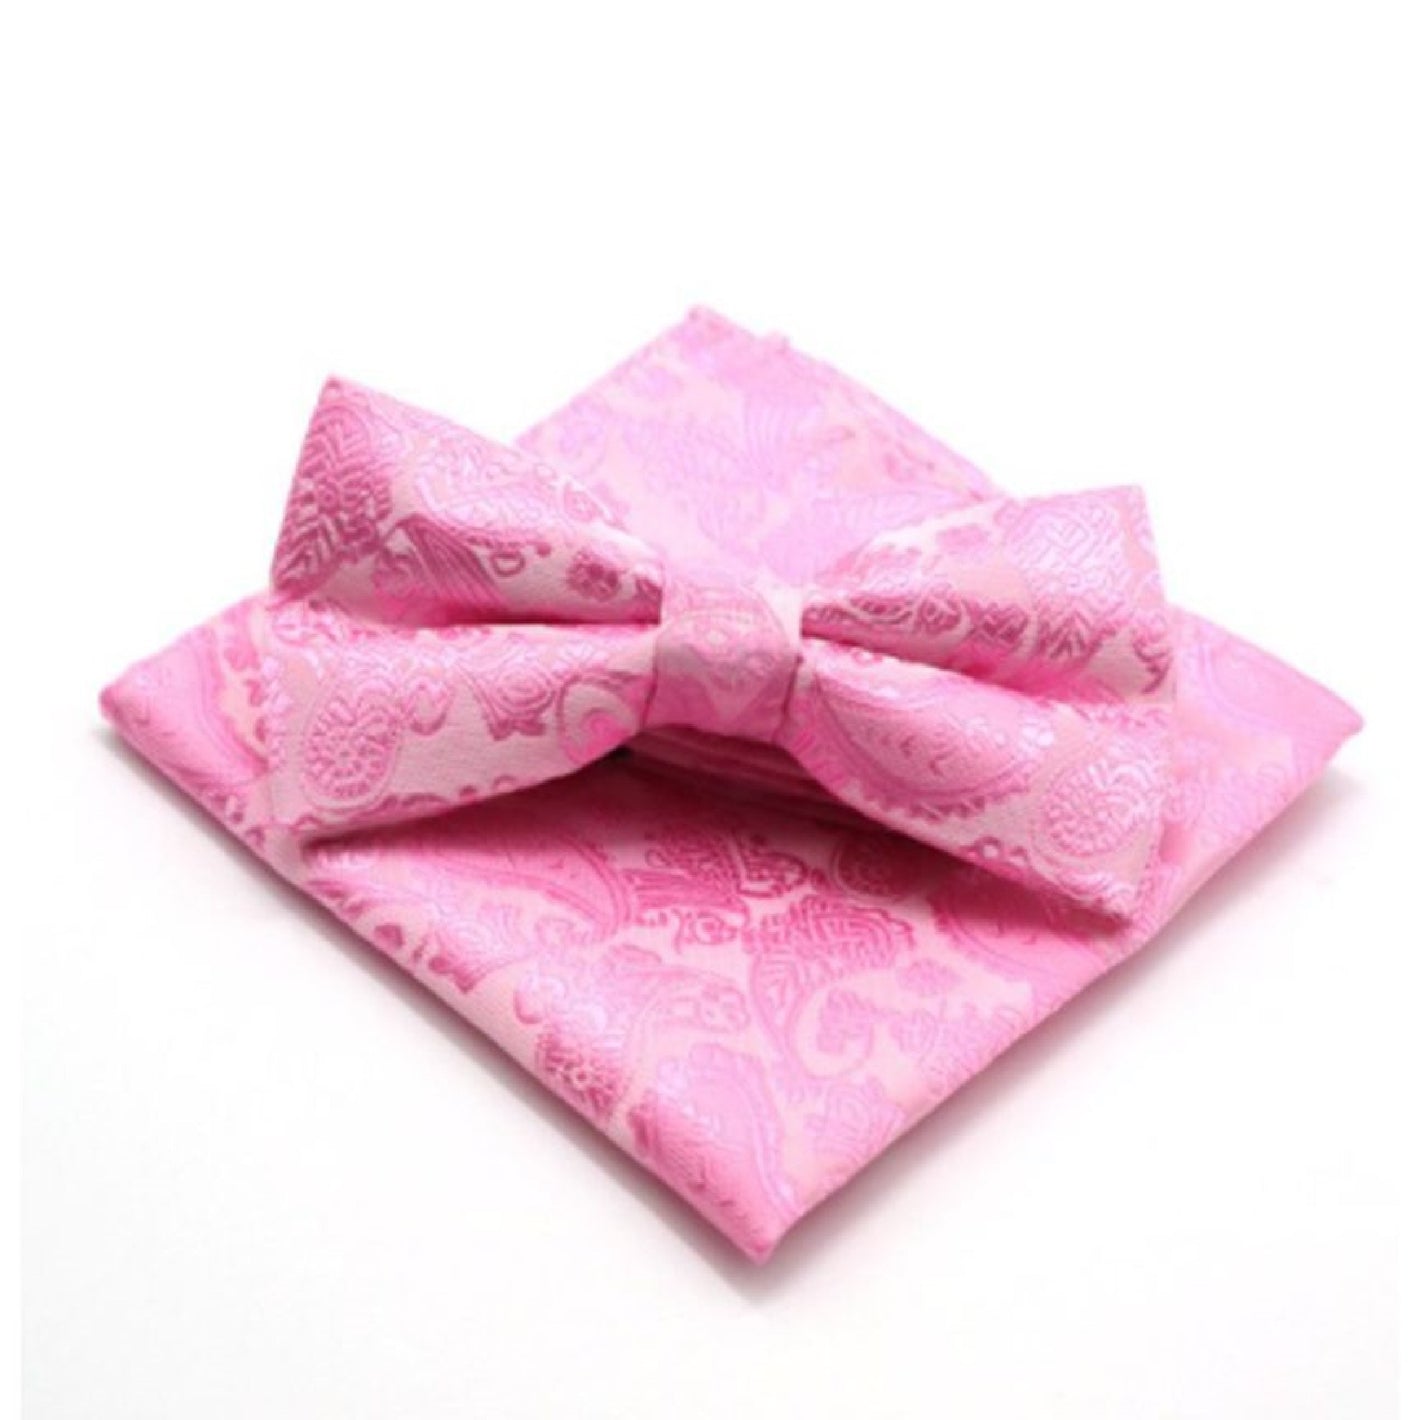 Mens wedding and debs bow tie collection - Silverbling.ie